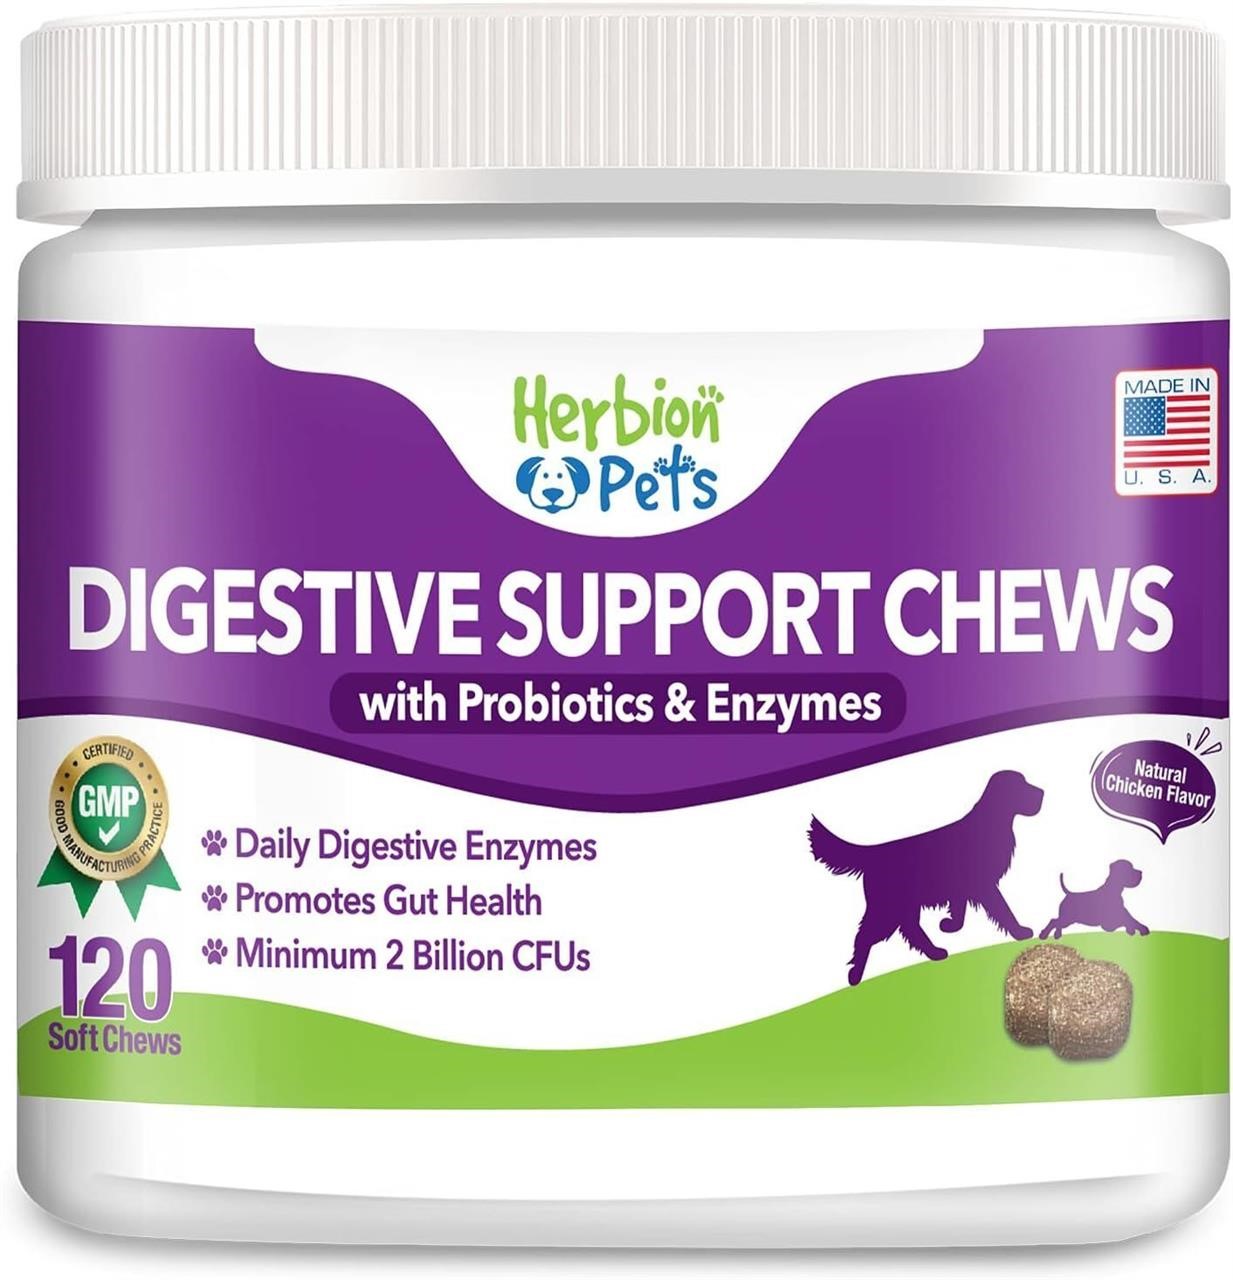 Herbion Pets Digestive Support Chews